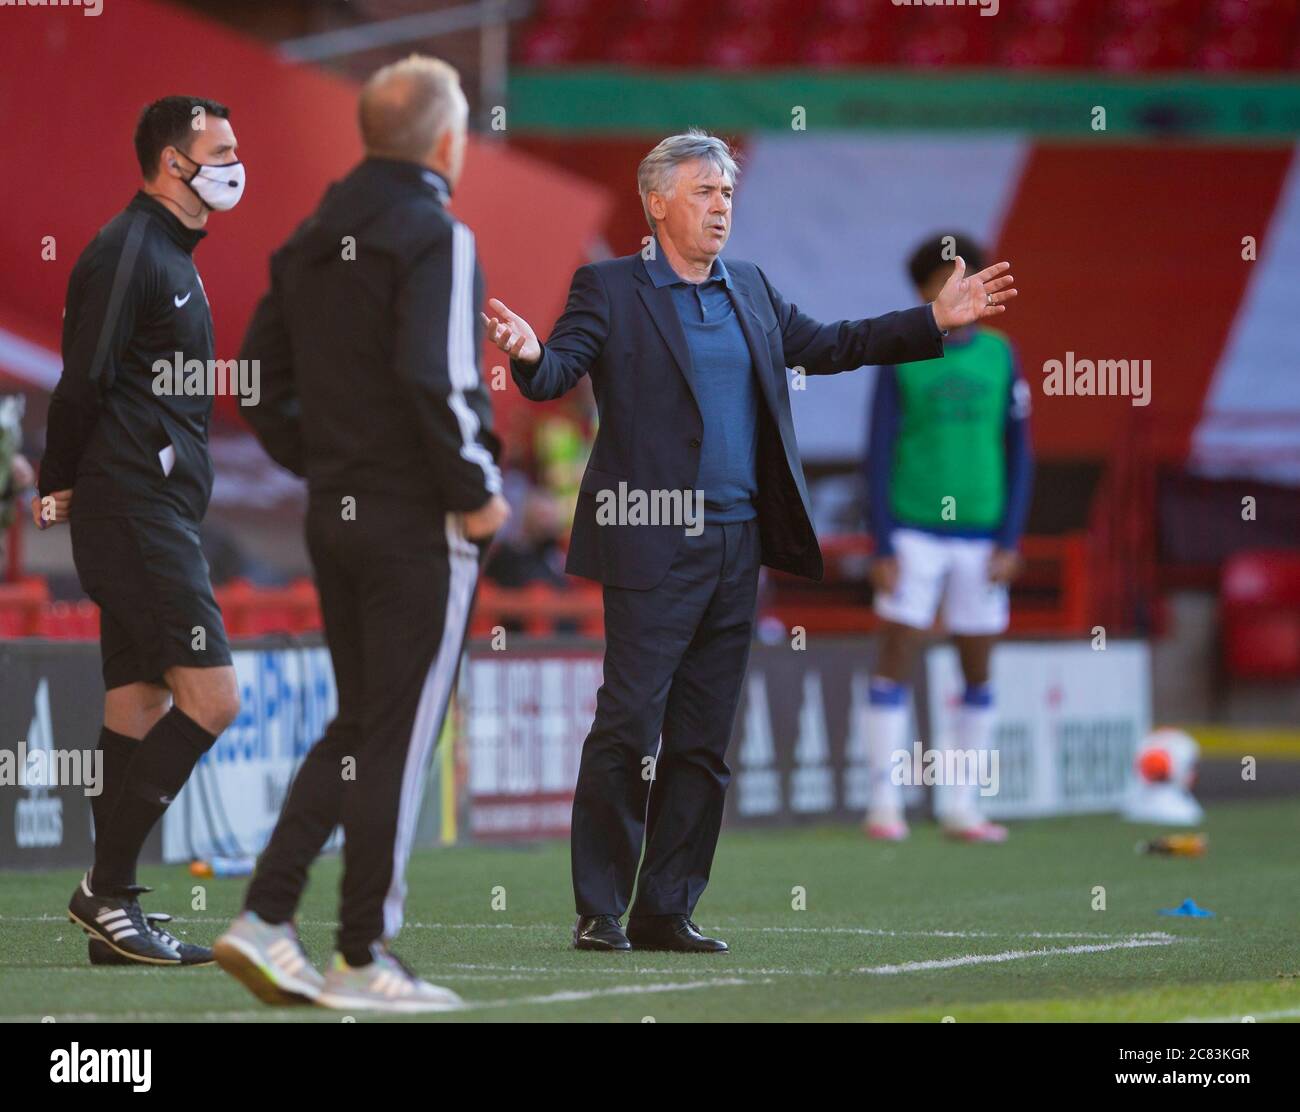 Sheffield. 20th July, 2020. Everton's manager Carlo Ancelotti (R) is seen during the English Premier League match between Sheffield United FC and Everton FC in Sheffield, Britain on July 20, 2020. Credit: Xinhua/Alamy Live News Stock Photo